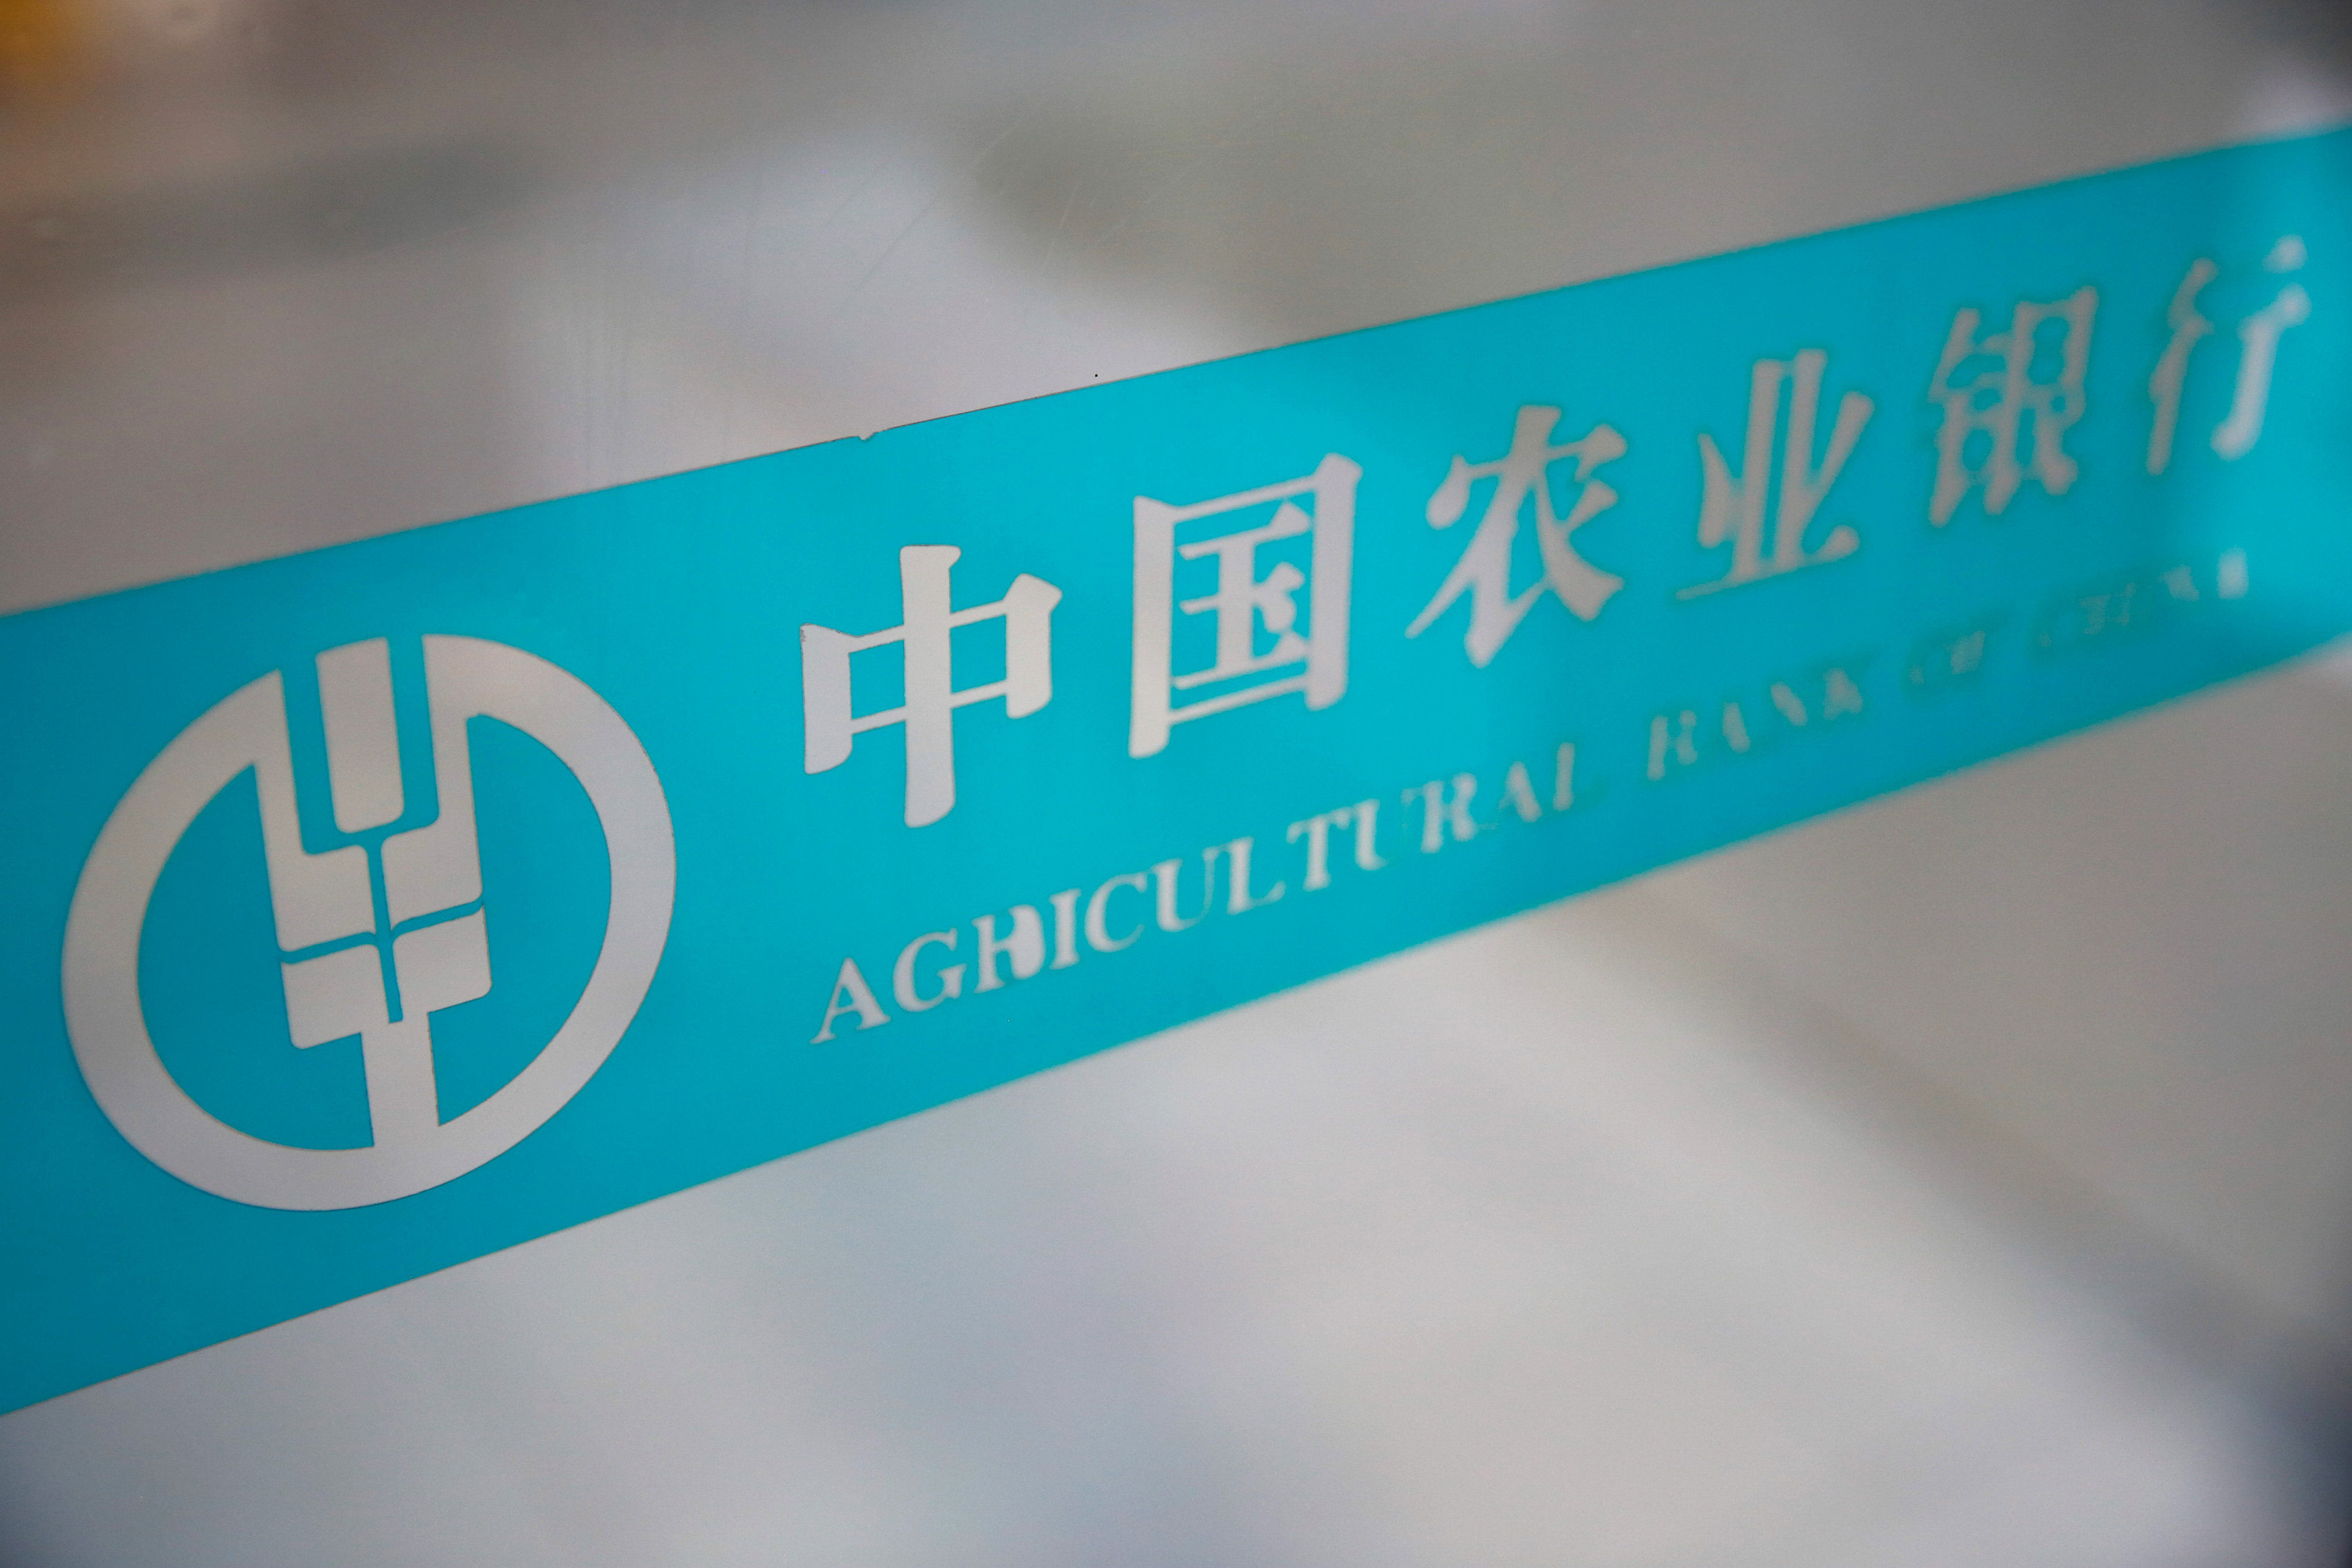 In 2024, the Agricultural Bank of China expects its asset quality to remain steady, owing in part to policy measures that have boosted growth and employment, an executive says. Photo: Reuters